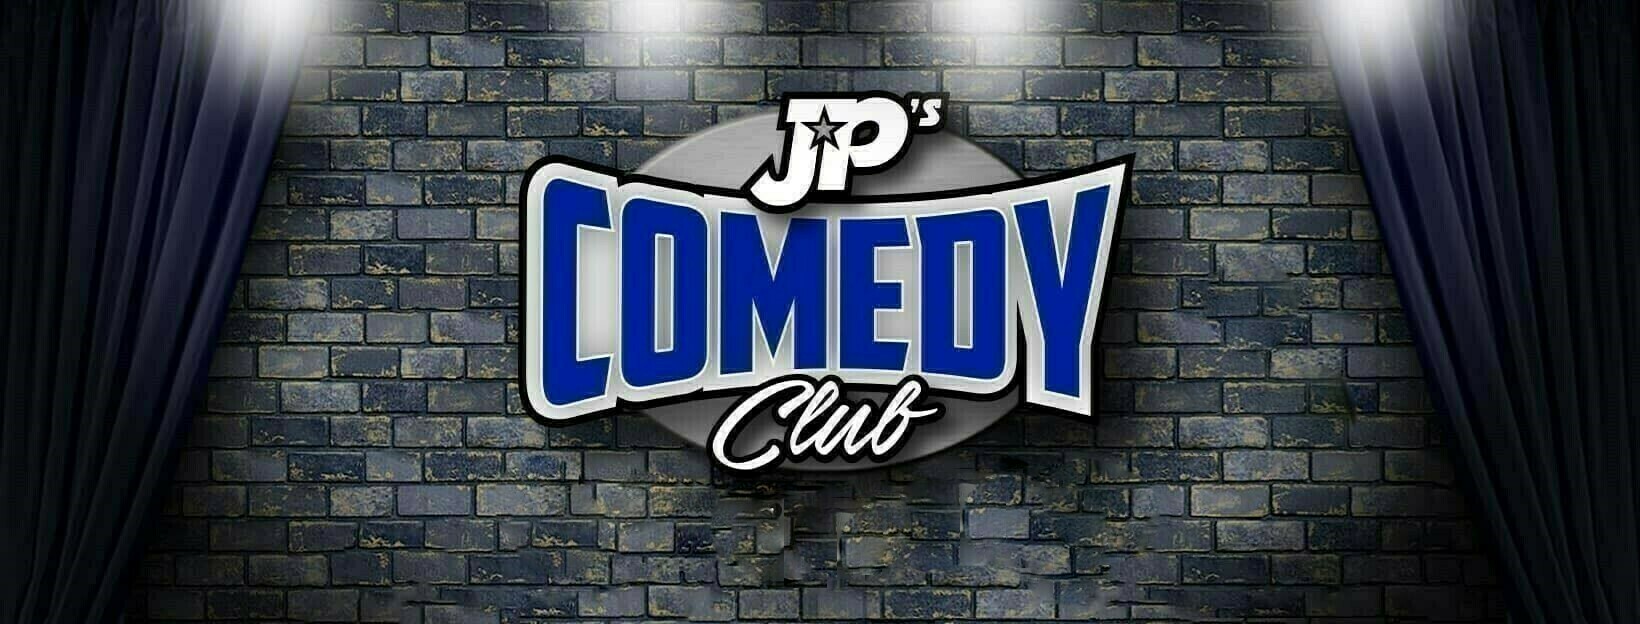 FREE Comedy Show in Gilbert (National Touring Comedian and Friends Show)- Reservation Required, Gilbert, Arizona, United States